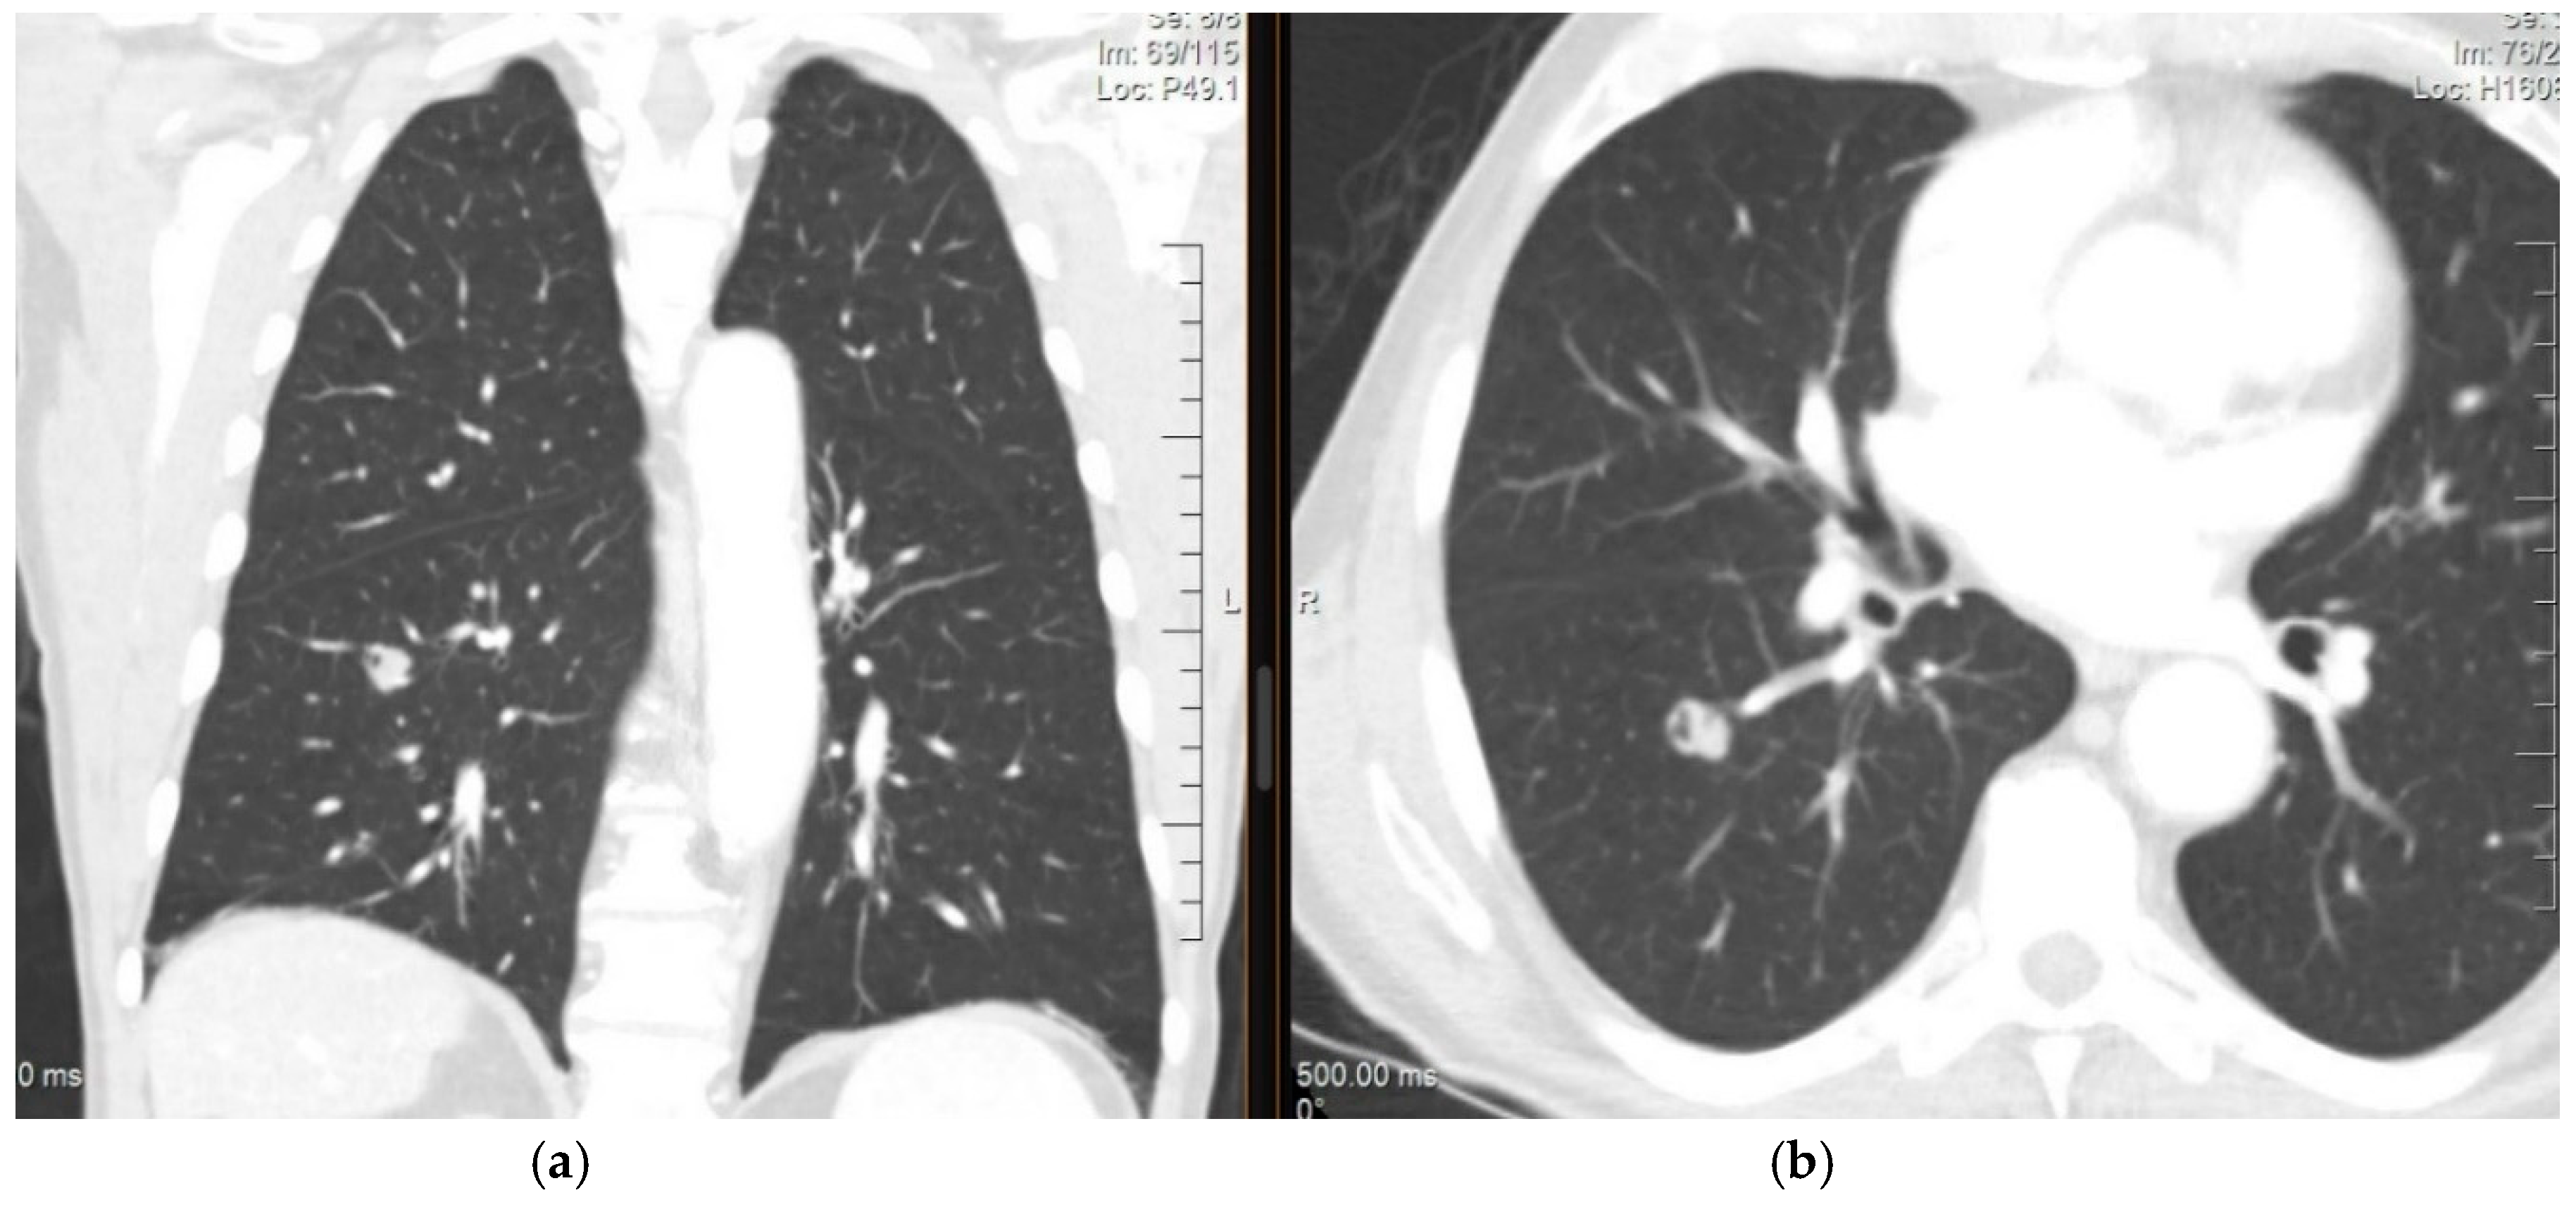 CA 27-29 in patients with breast cancer with pulmonary fibrosis